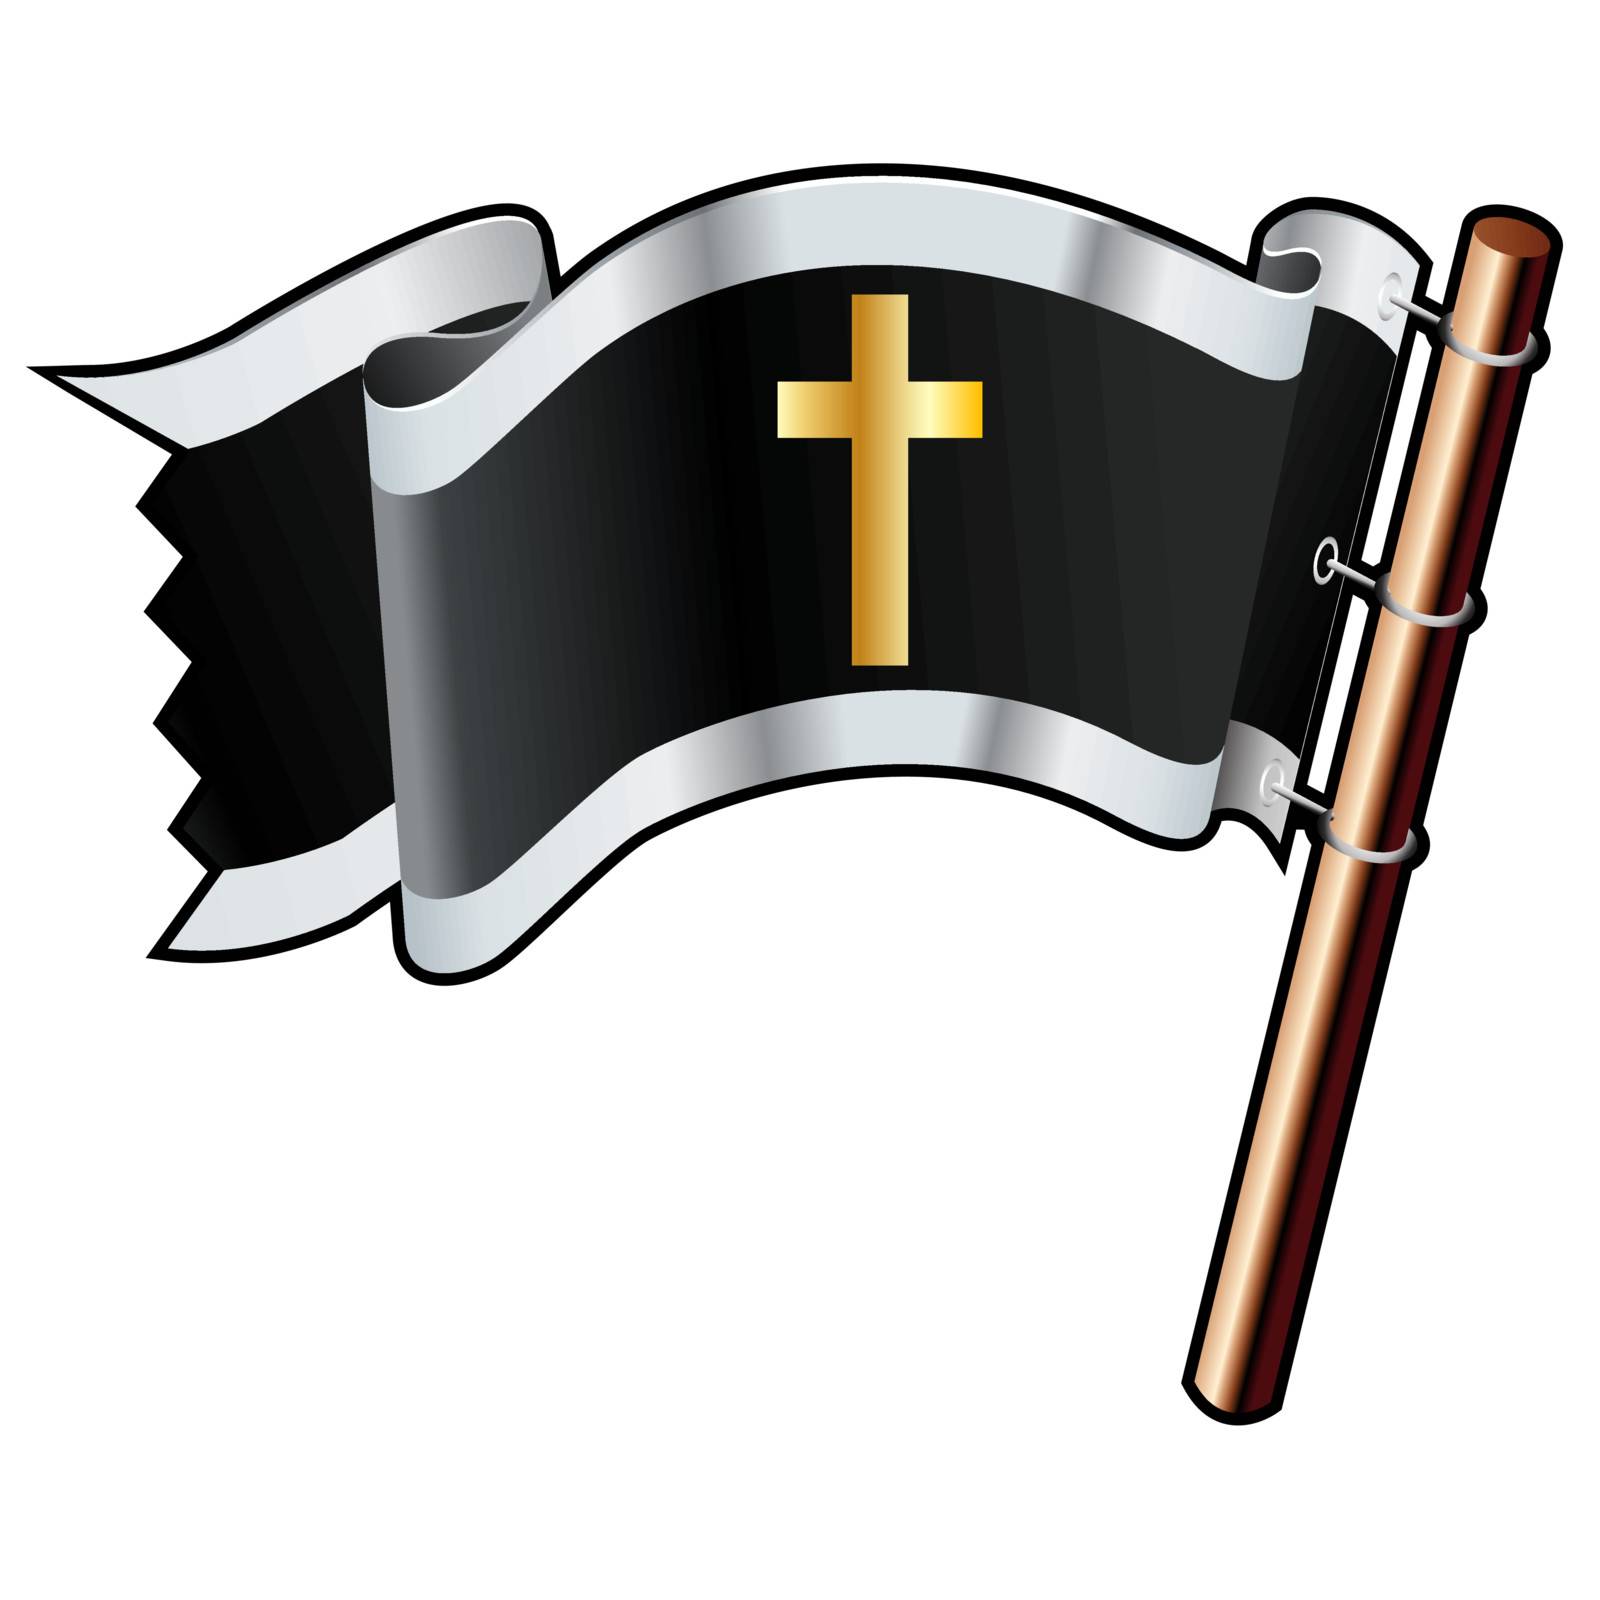 Crucifix pirate flag by lhfgraphics